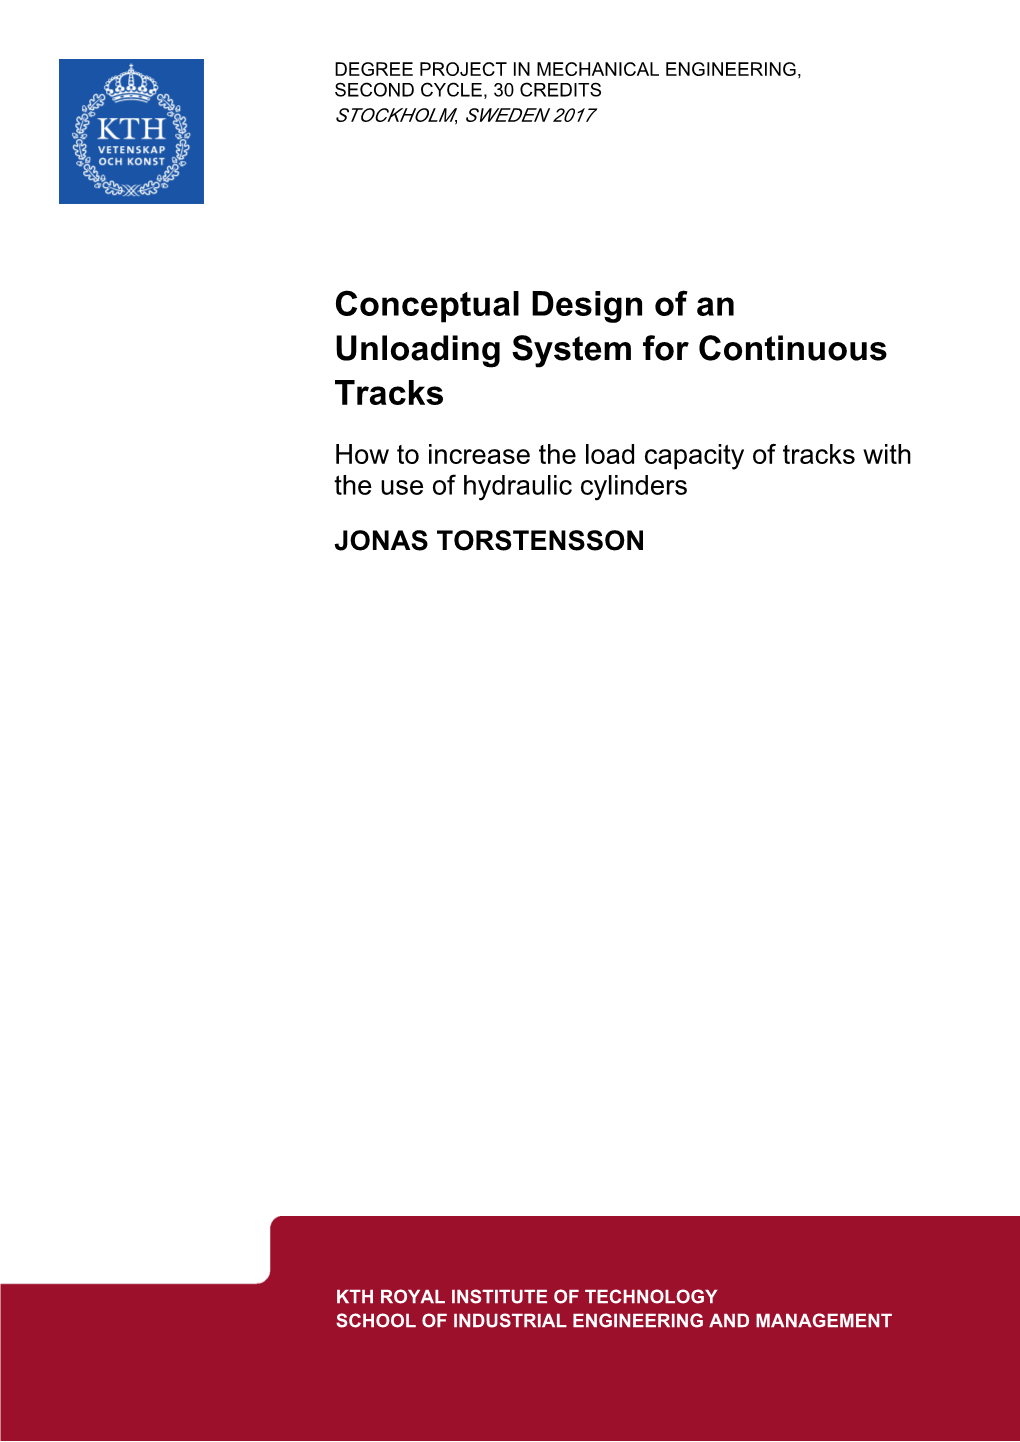 Conceptual Design of an Unloading System for Continuous Tracks